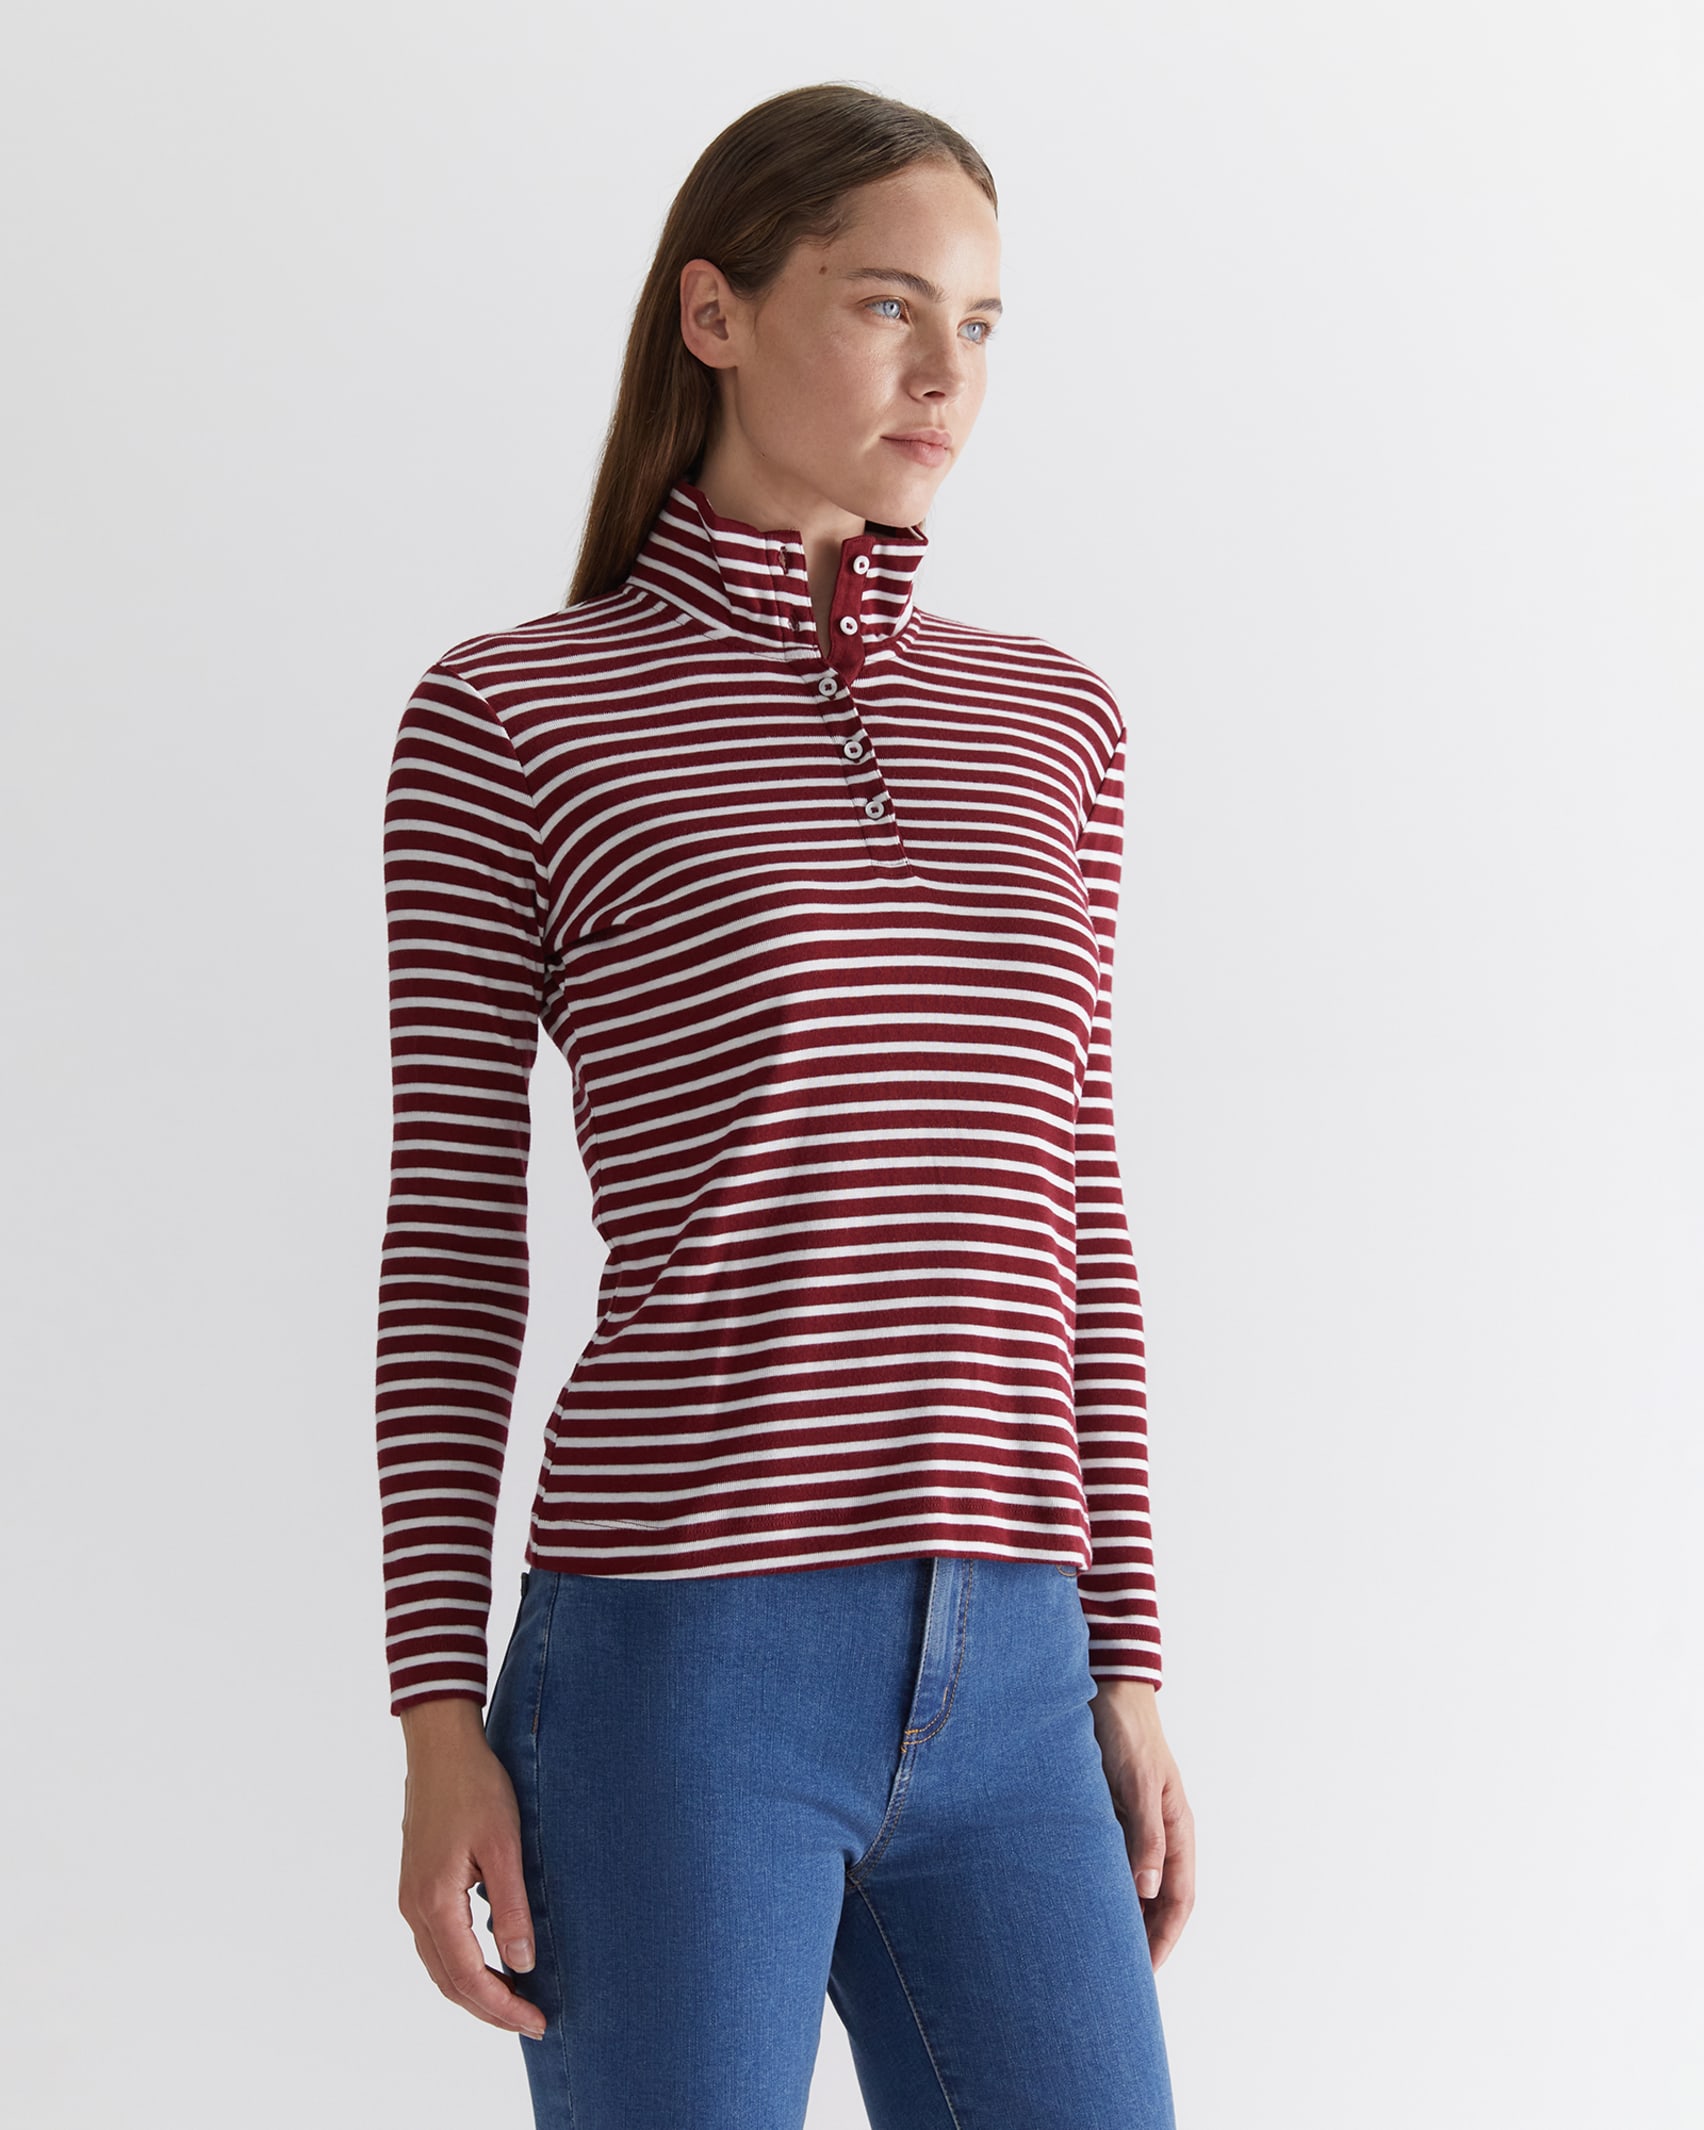 Lucy Funnel Neck Top in IVORY/BURGUNDY